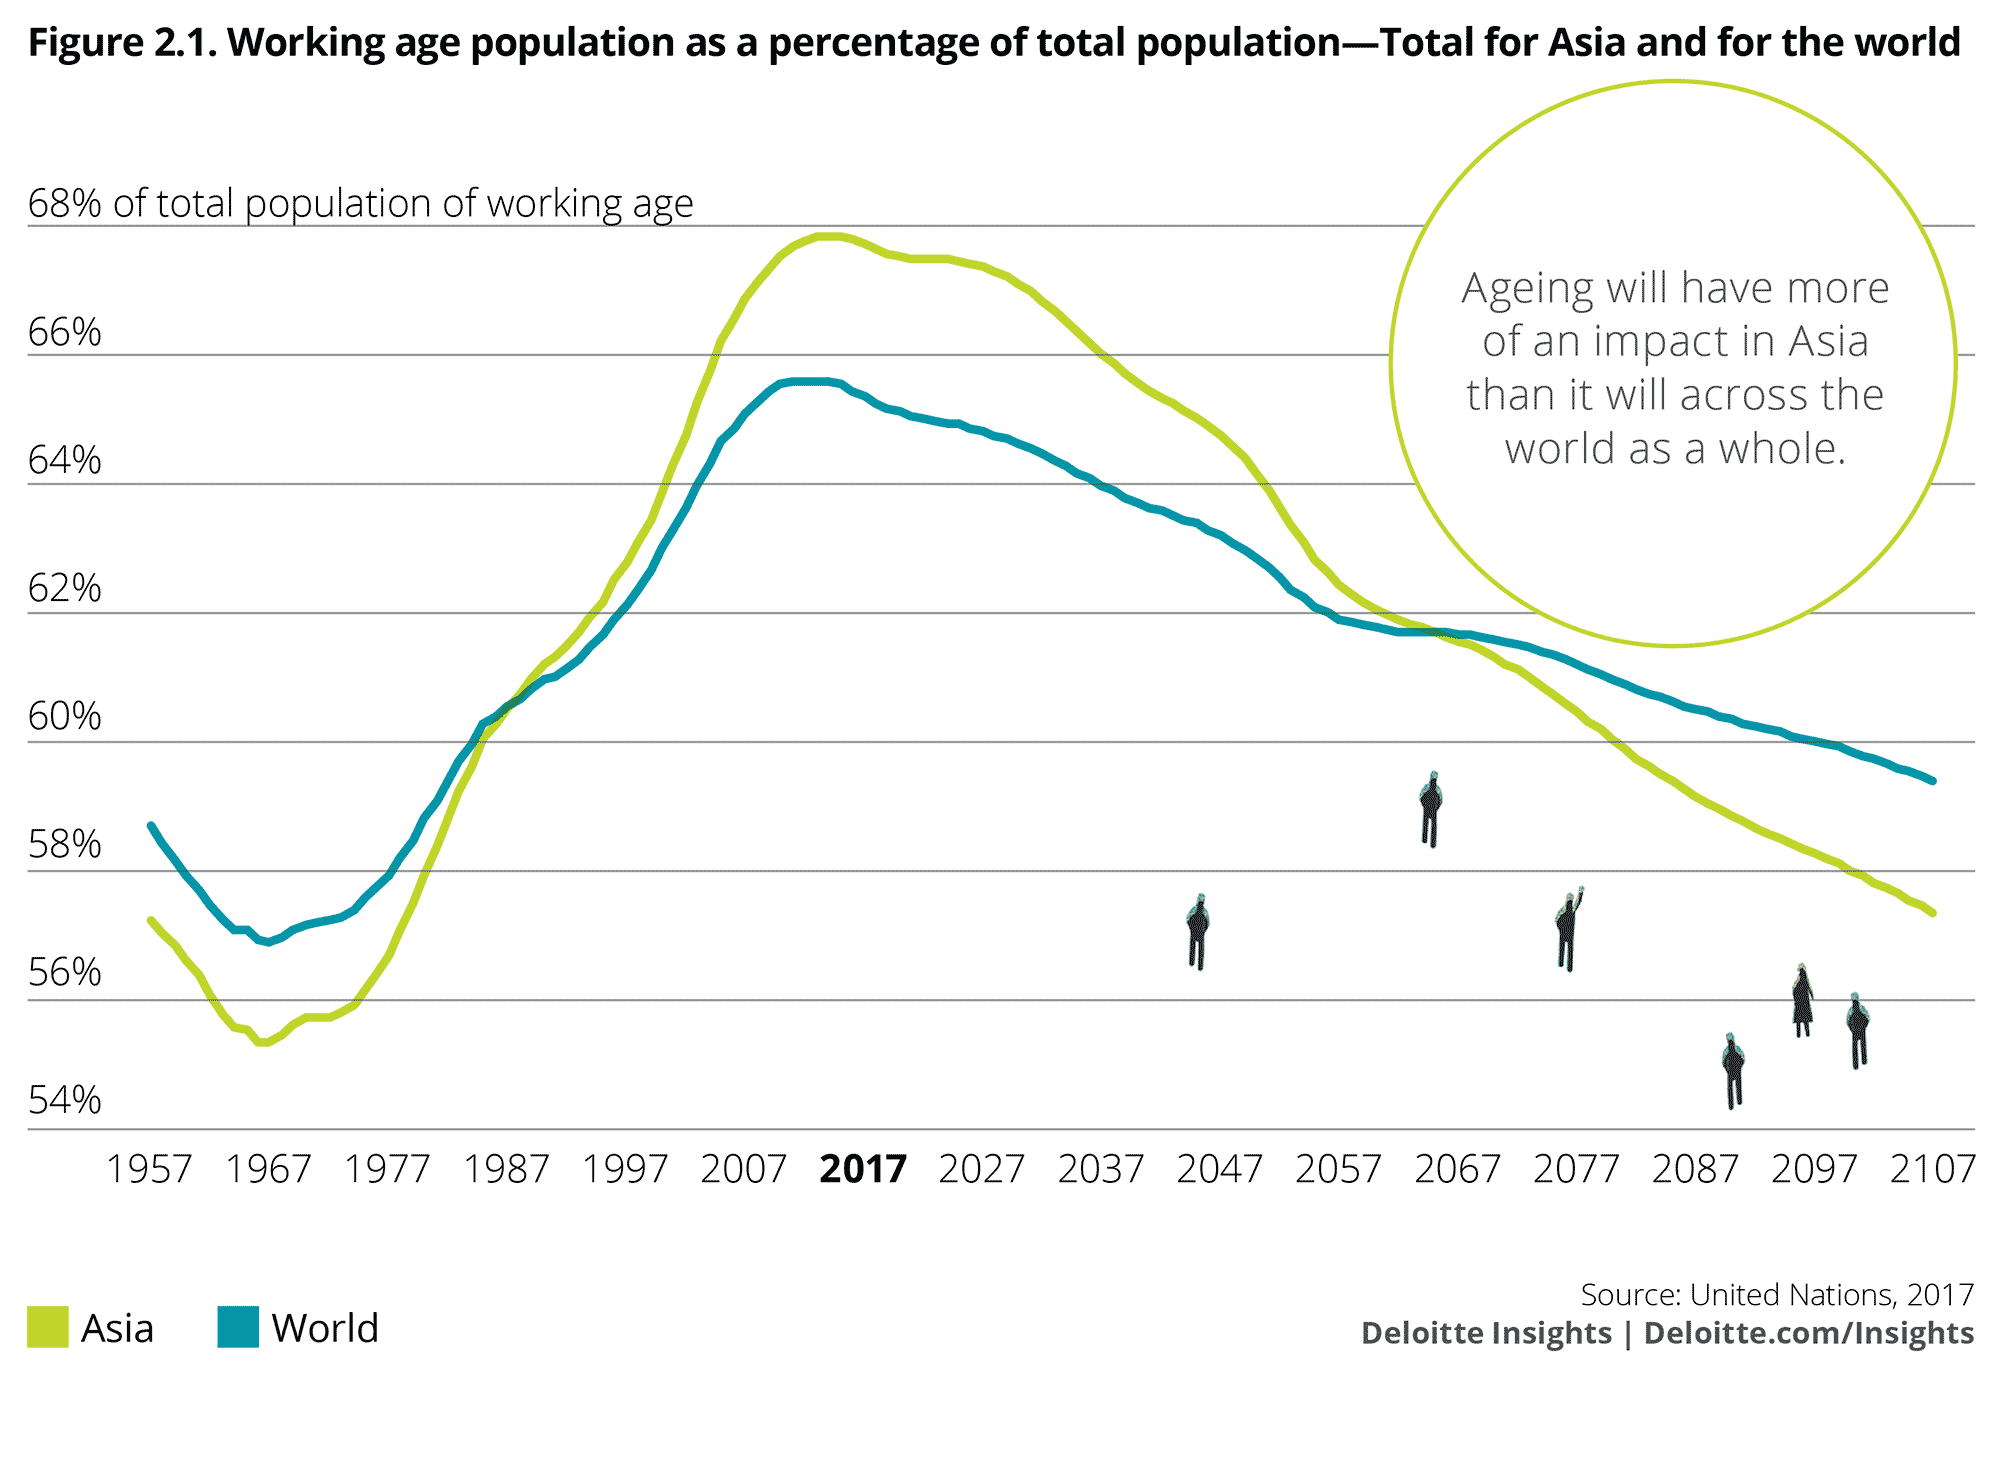 Working age population as a percentage of total population: Total for Asia and for the world